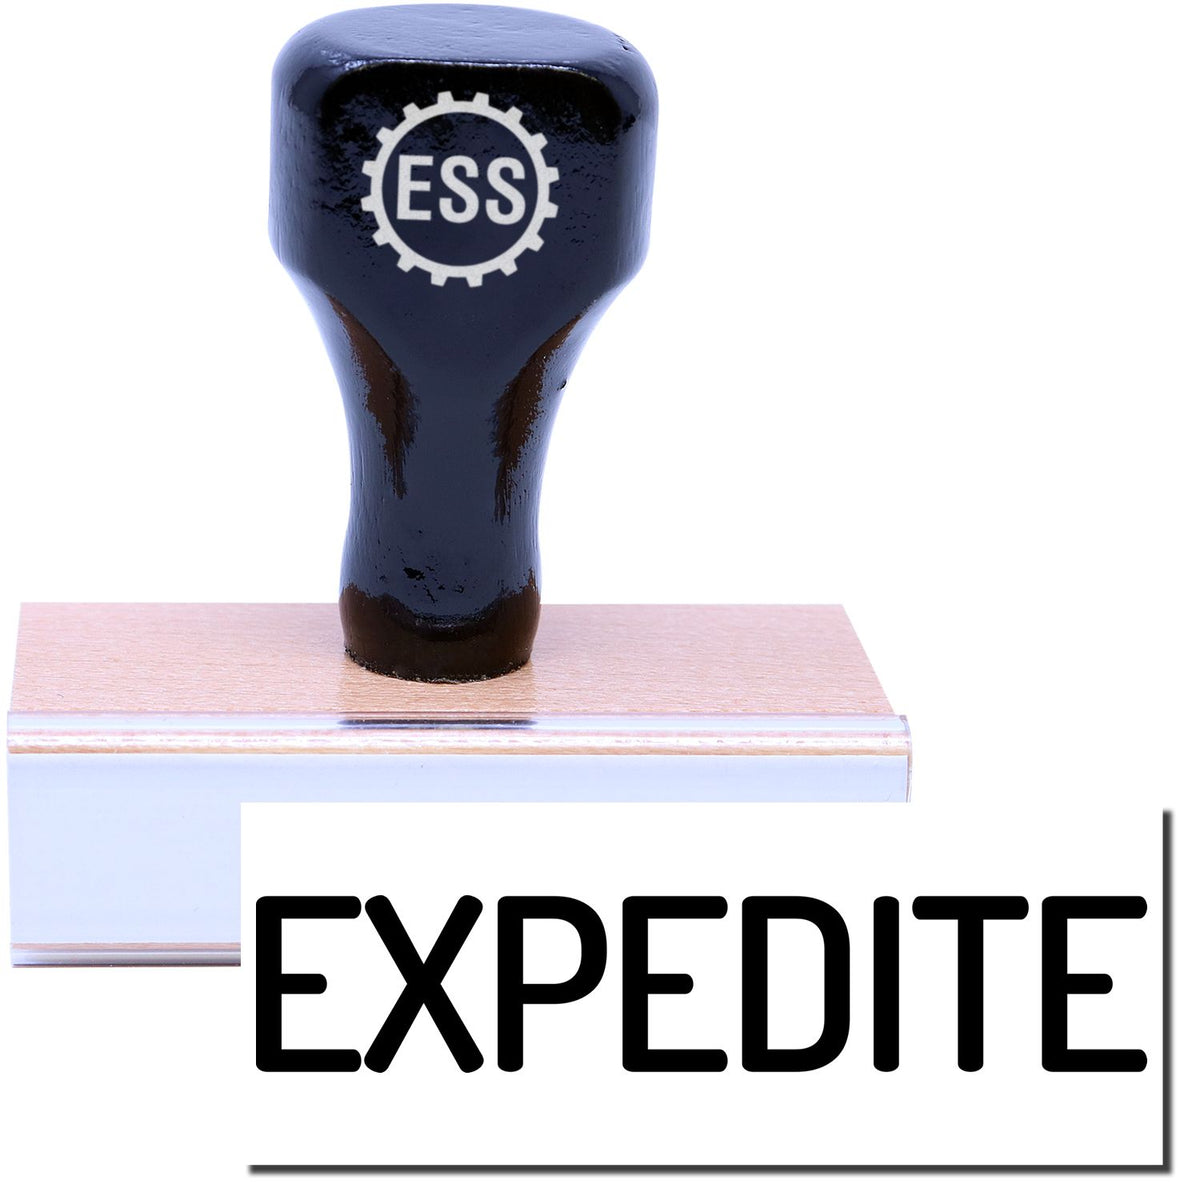 A stock office rubber stamp with a stamped image showing how the text &quot;EXPEDITE&quot; in a narrow font is displayed after stamping.